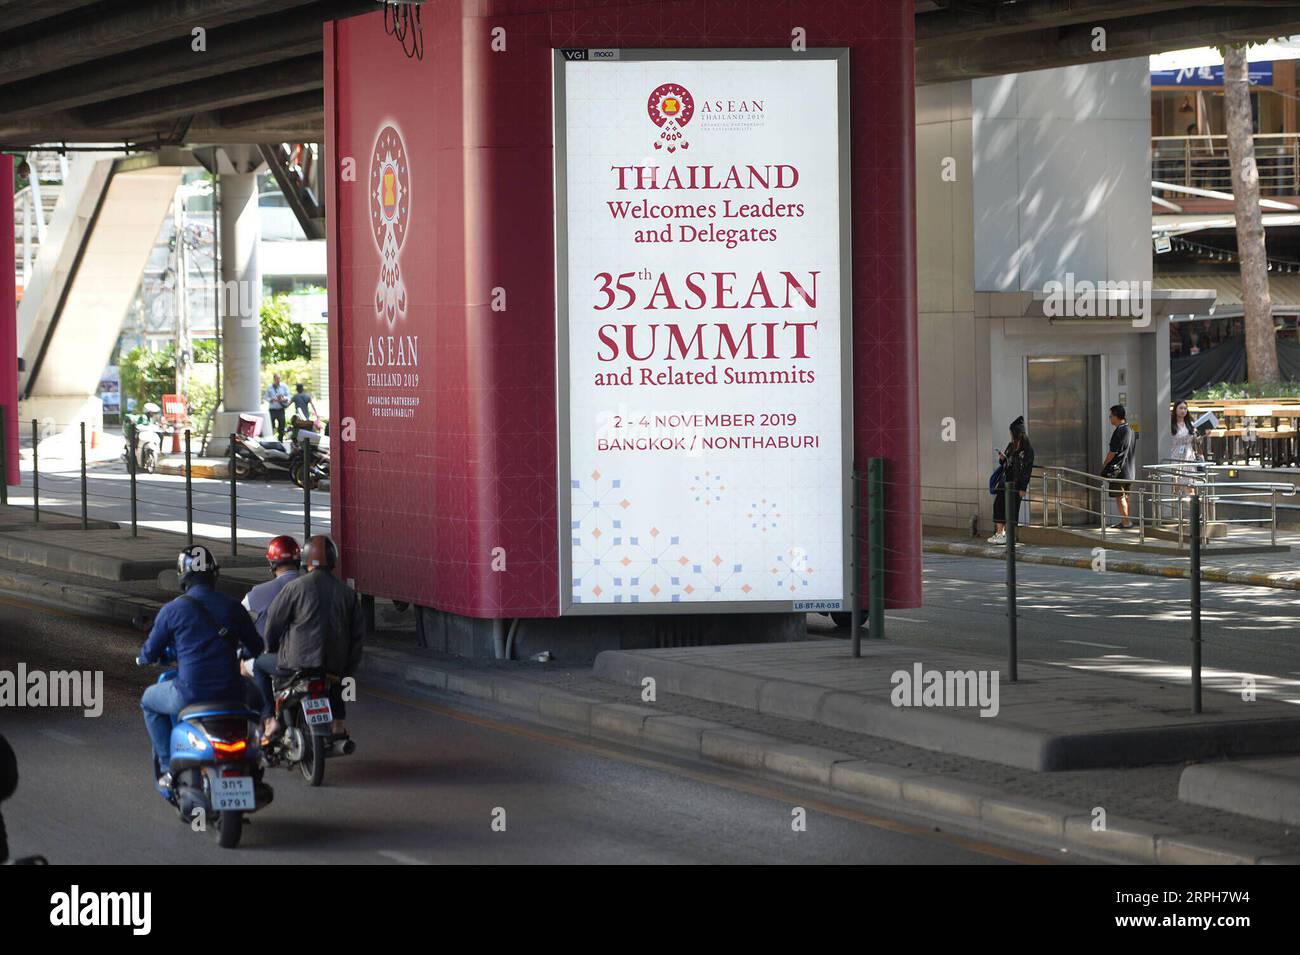 191101 -- BANGKOK, Nov. 1, 2019 -- People pass by a poster of the 35th ASEAN summit and related summits in Bangkok, Thailand, Oct. 30, 2019. The 35th ASEAN summit and related summits are scheduled for Nov. 2 to 4 in Bangkok. Rachen Sageamsak THAILAND-BANGKOK-ASEAN SUMMIT-PREPARATION LaxHeng PUBLICATIONxNOTxINxCHN Stock Photo